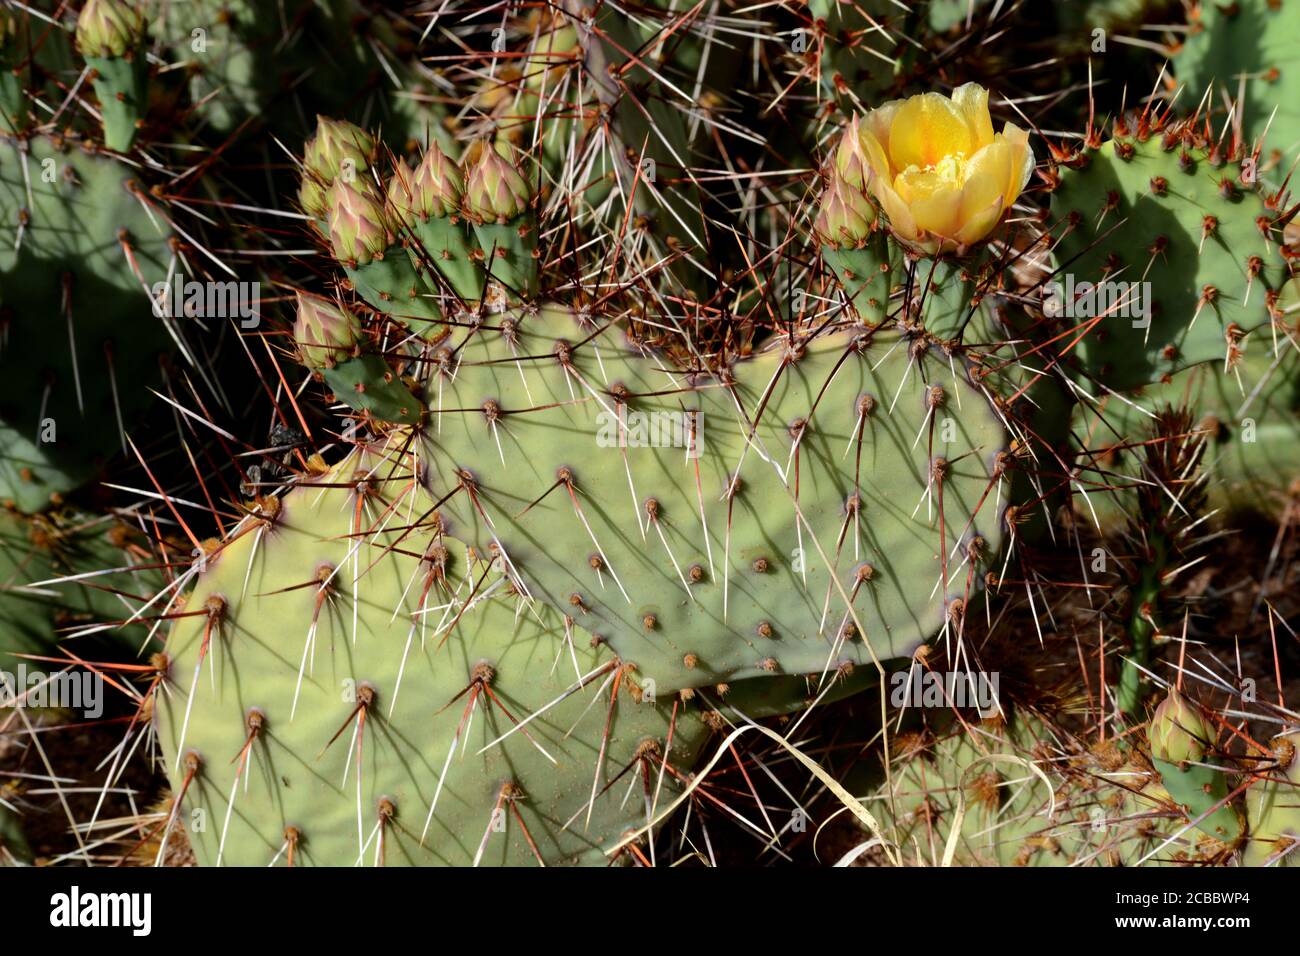 A New Mexico prickly pear cactus (Opuntia phaeacantha) blooms in the American Southwest desert. Stock Photo